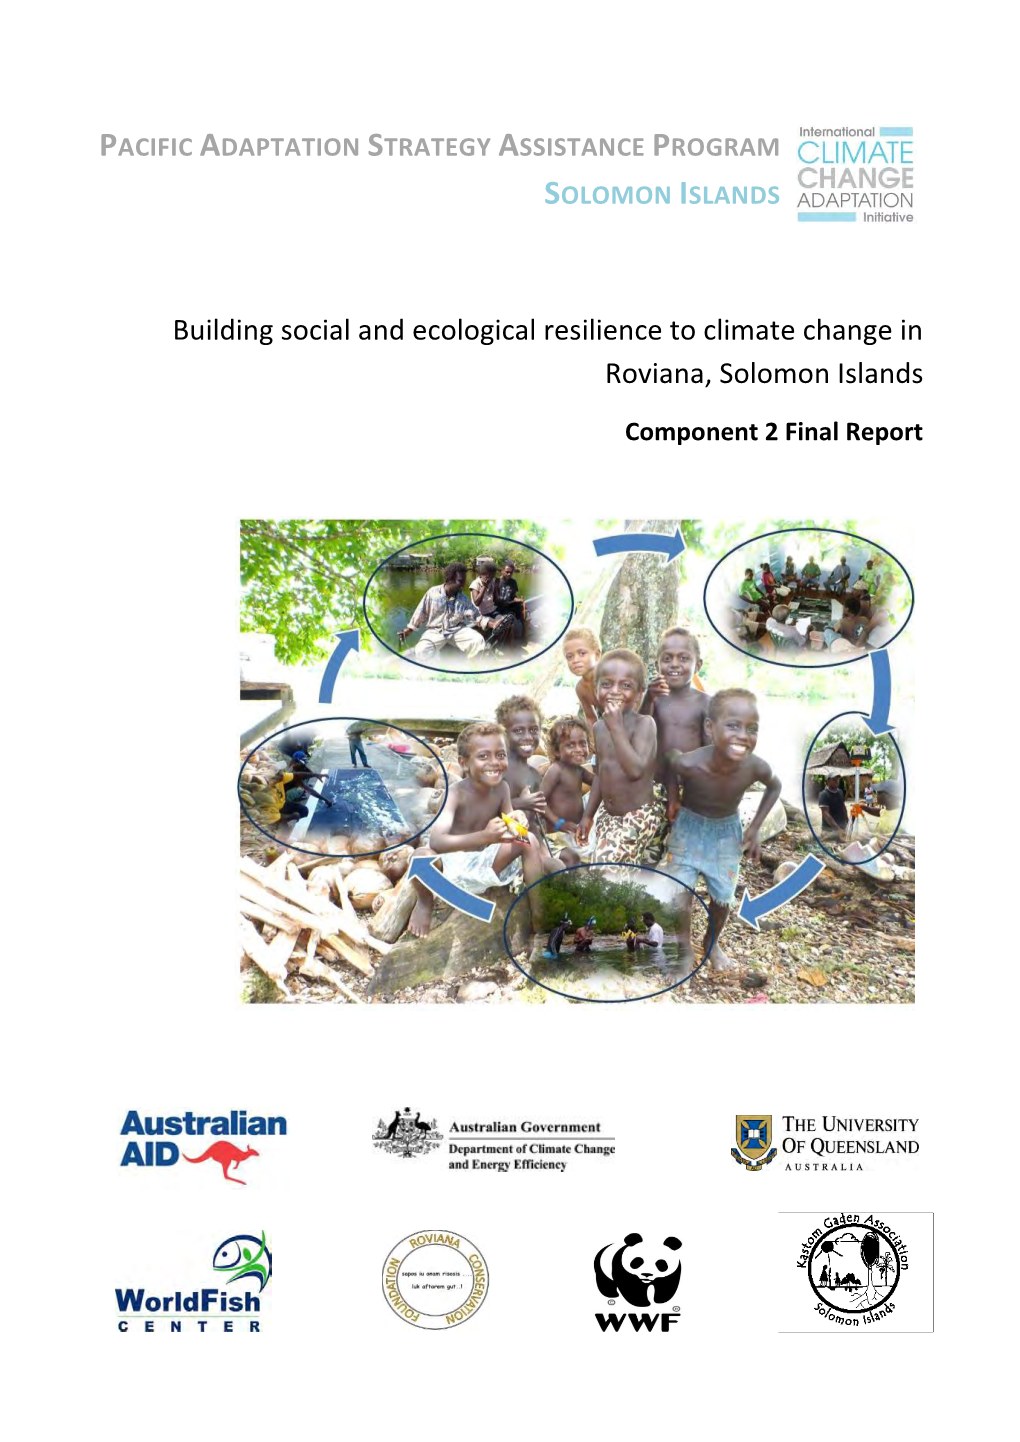 Building Social and Ecological Resilience to Climate Change in Roviana, Solomon Islands